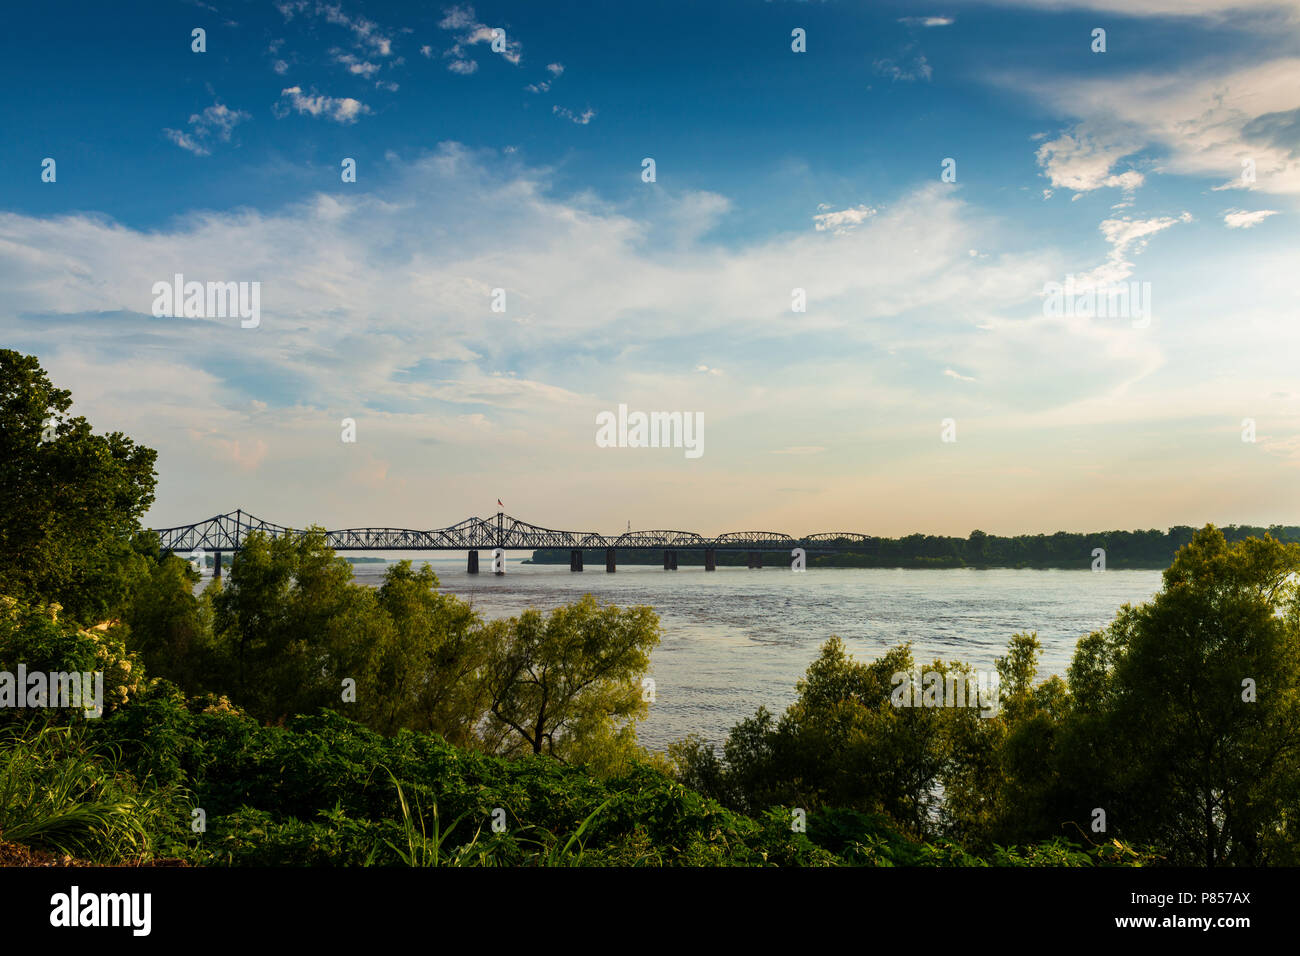 View of the Mississippi River with the Vicksburg Bridge on the background at sunset; Concept for travel in the USA and visit Mississippi Stock Photo